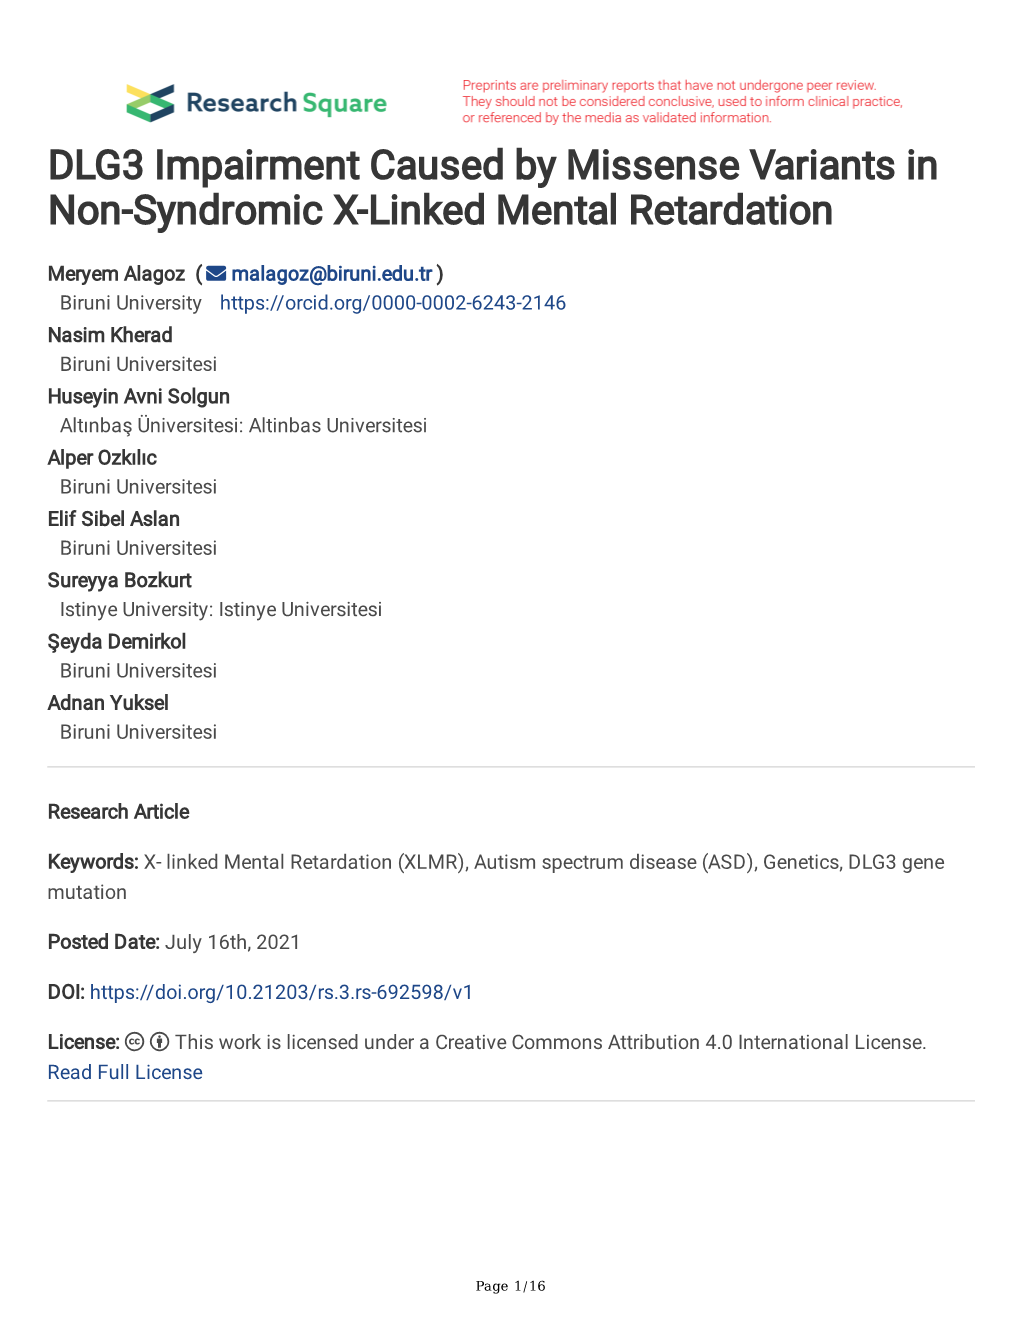 DLG3 Impairment Caused by Missense Variants in Non-Syndromic X-Linked Mental Retardation